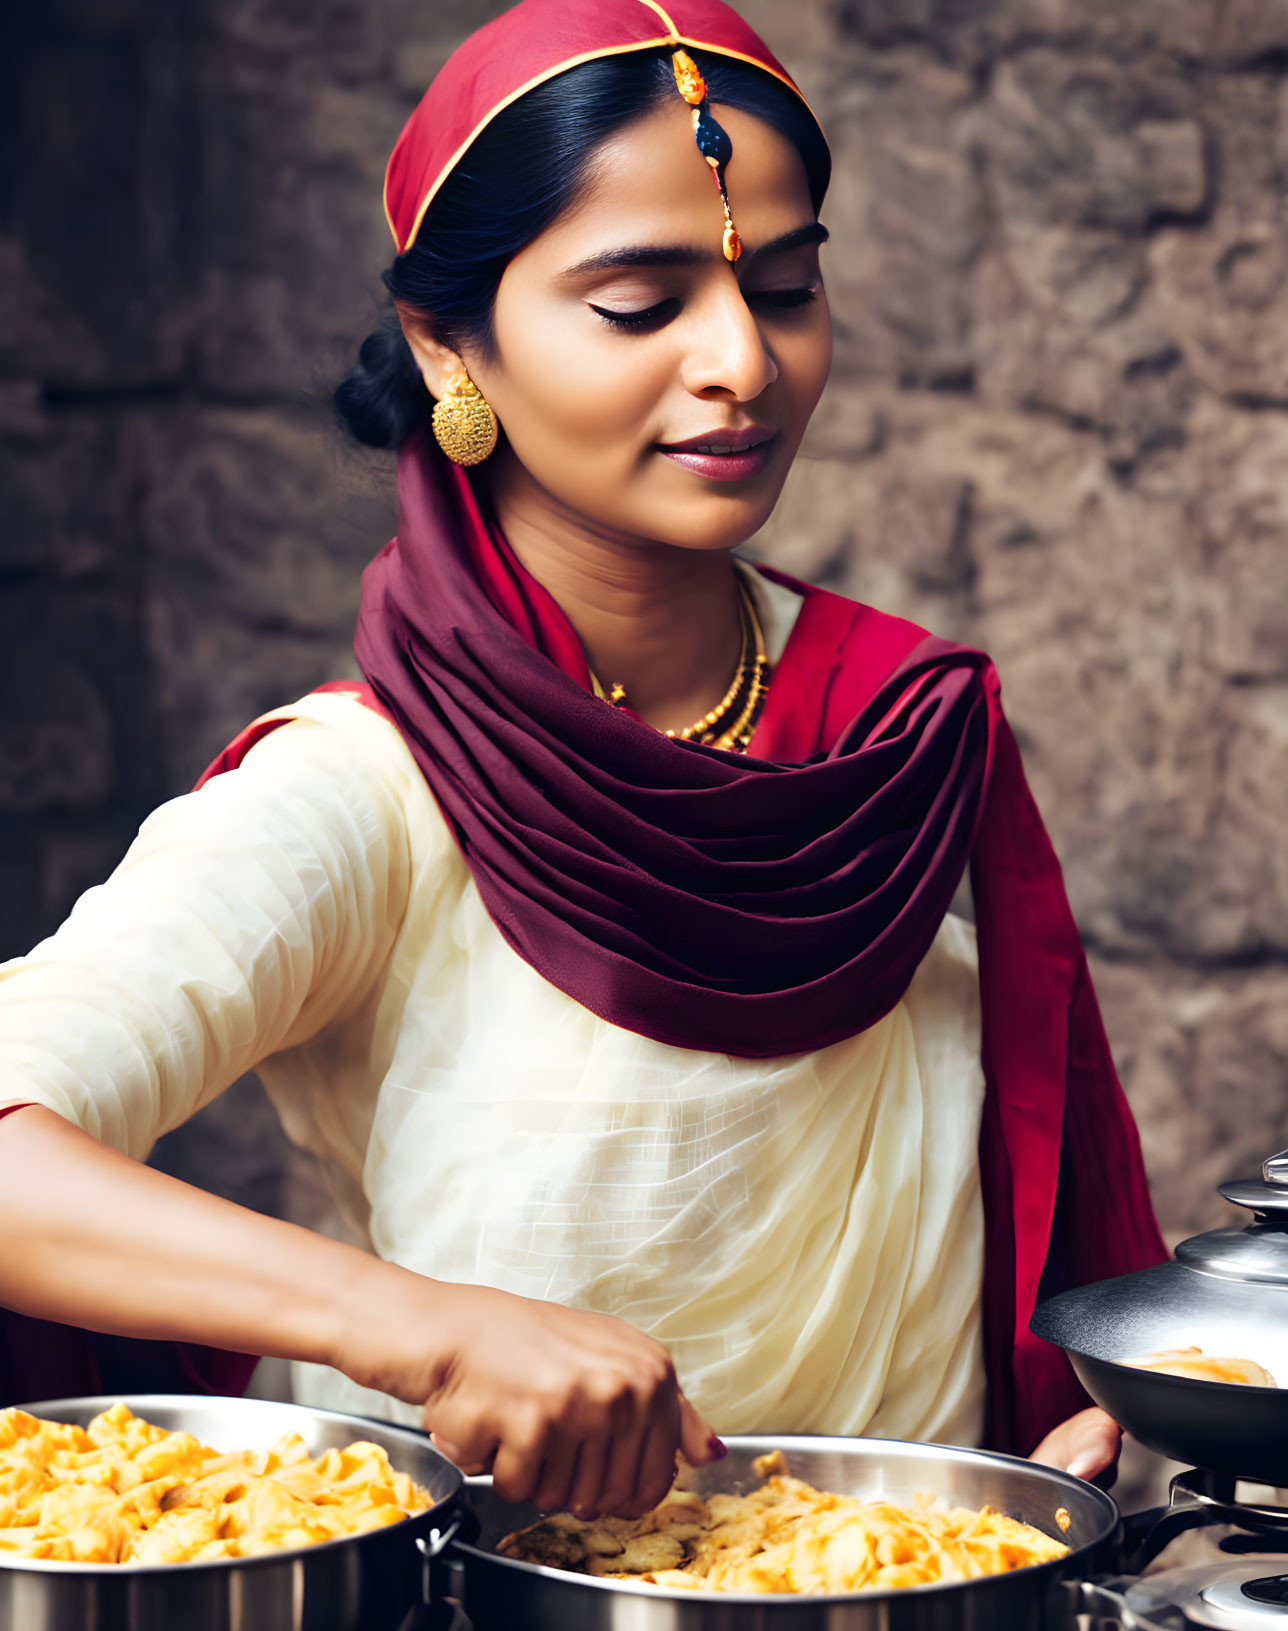 Traditional Indian woman cooking with red headband and gold jewelry